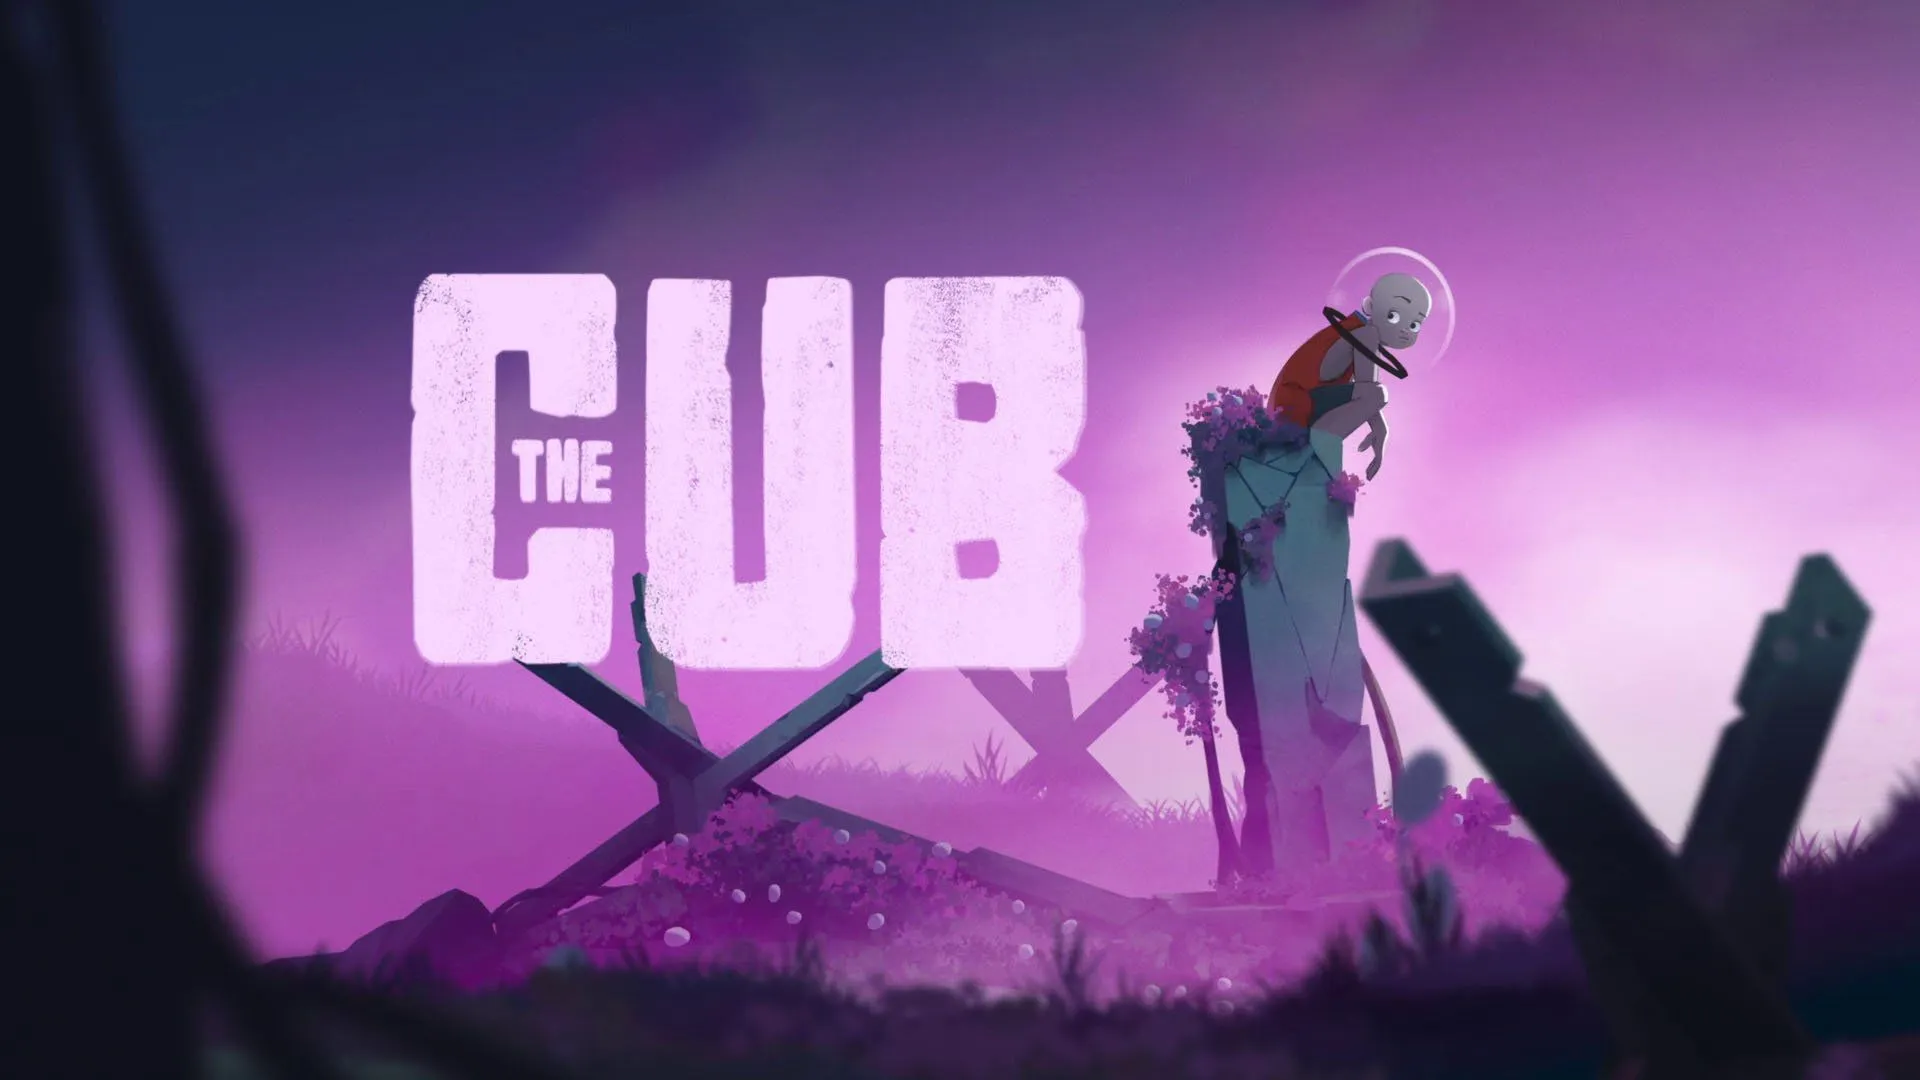 the cub cover